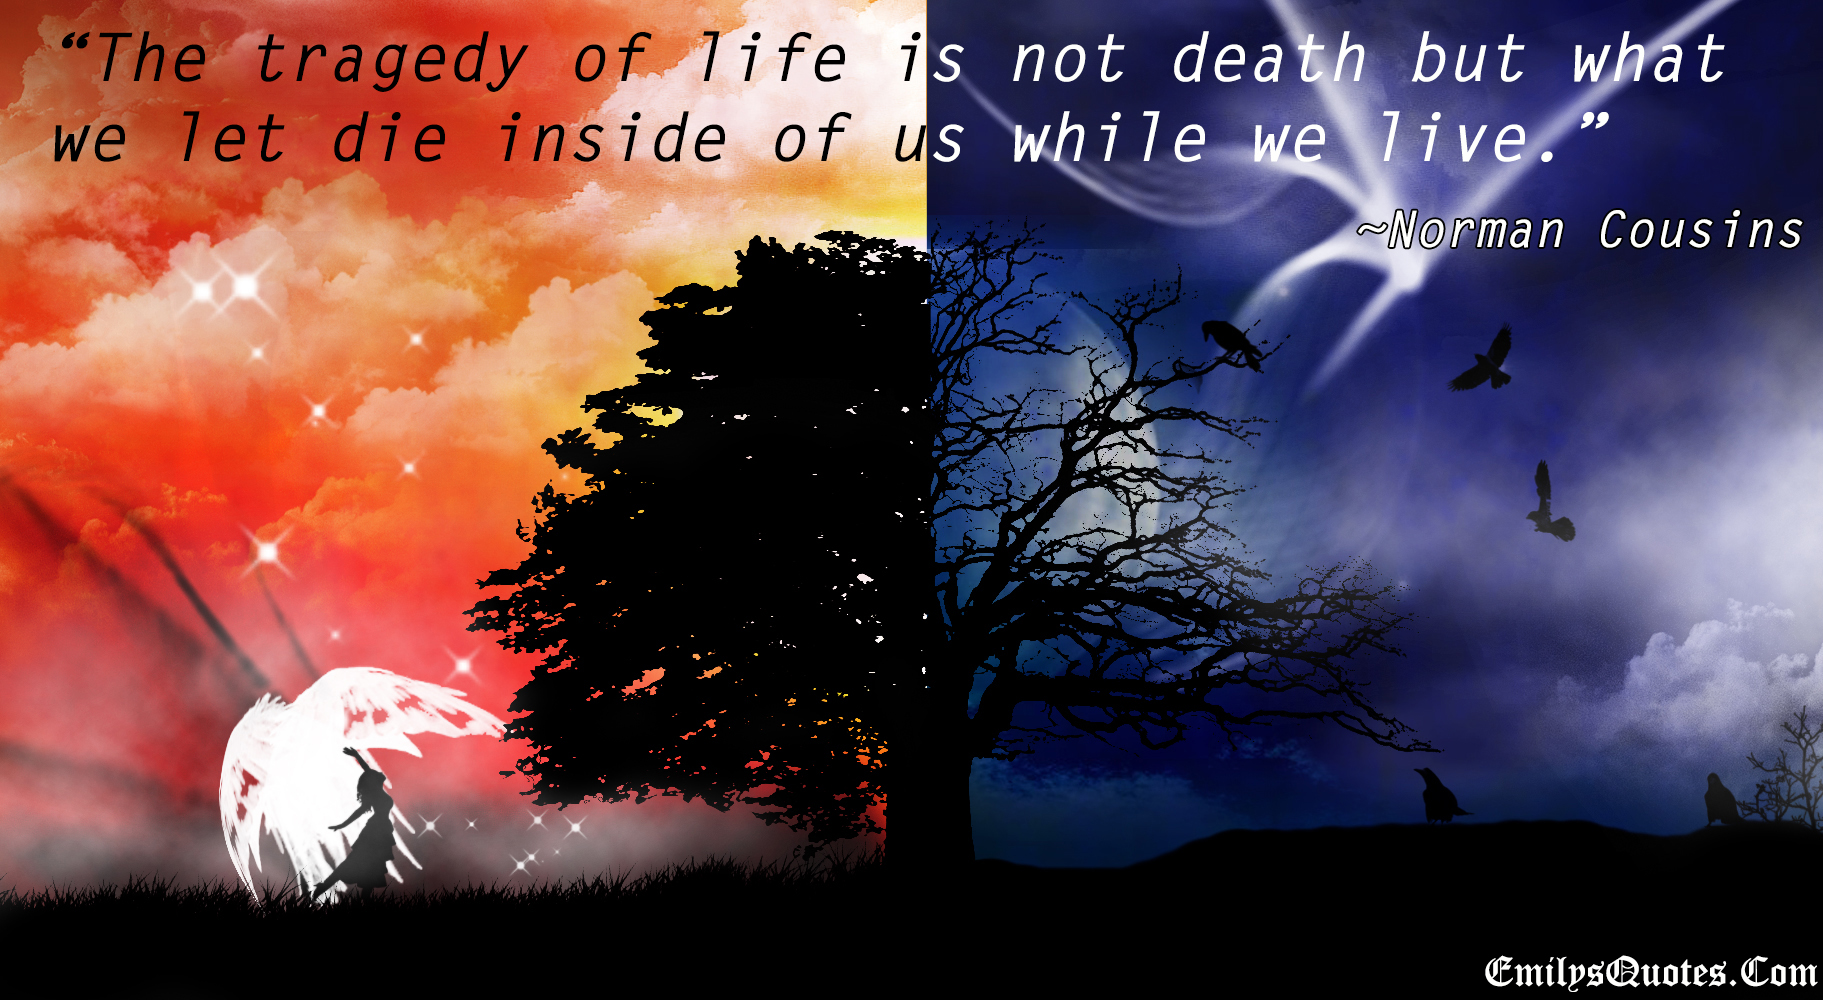 The tragedy of life is not death but what we let die inside of us while we live